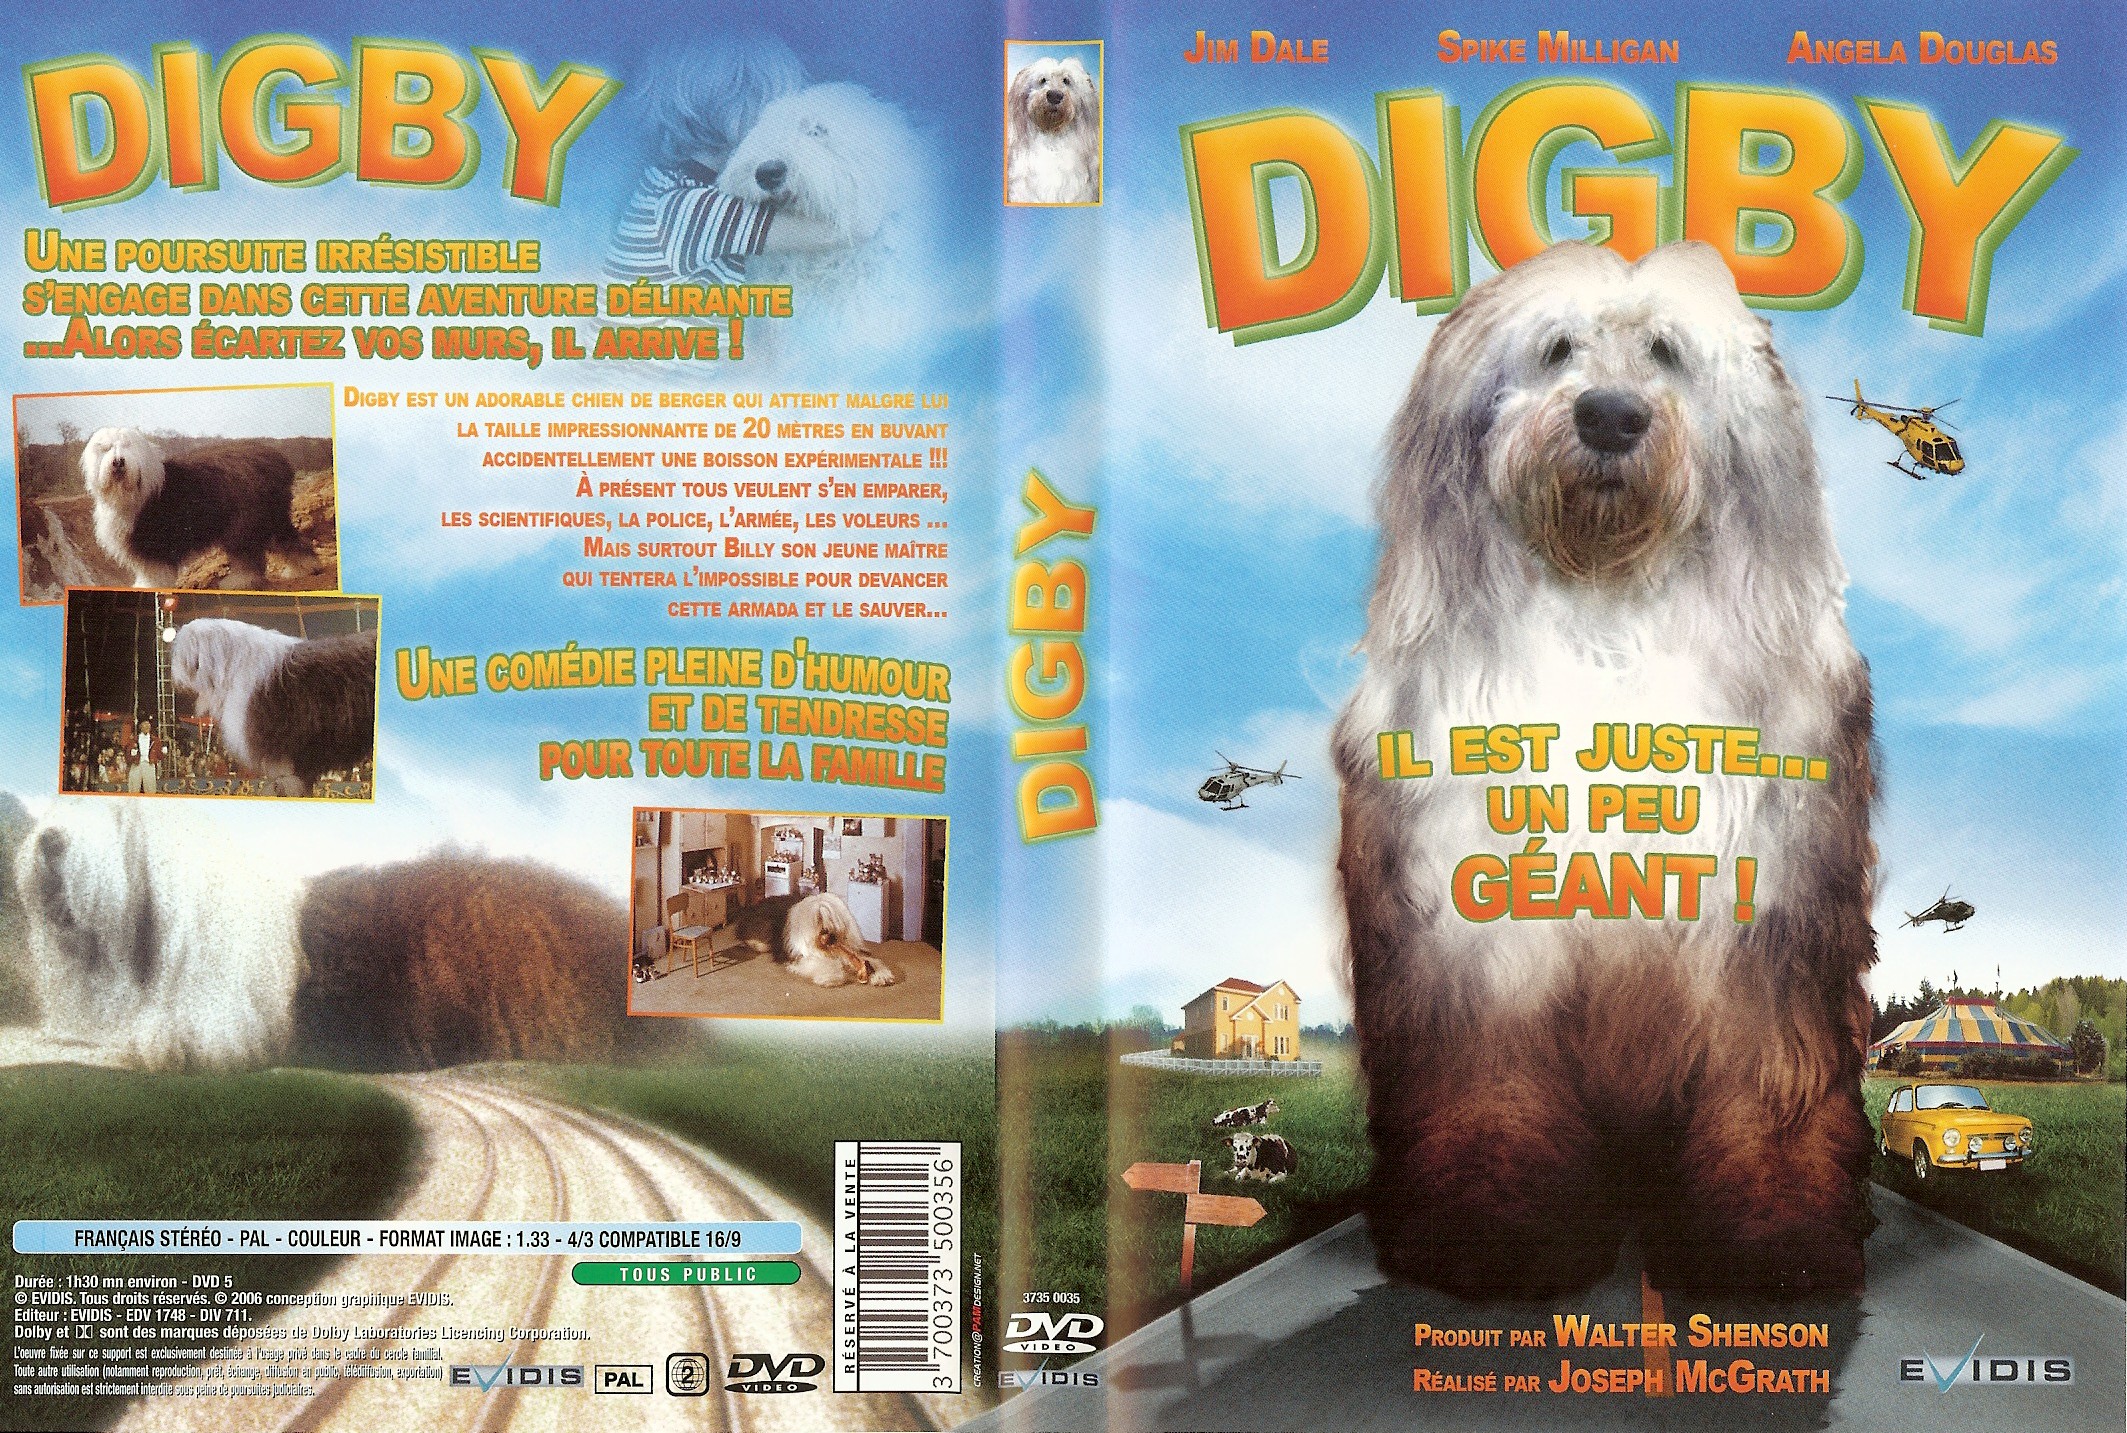 Jaquette DVD Digby